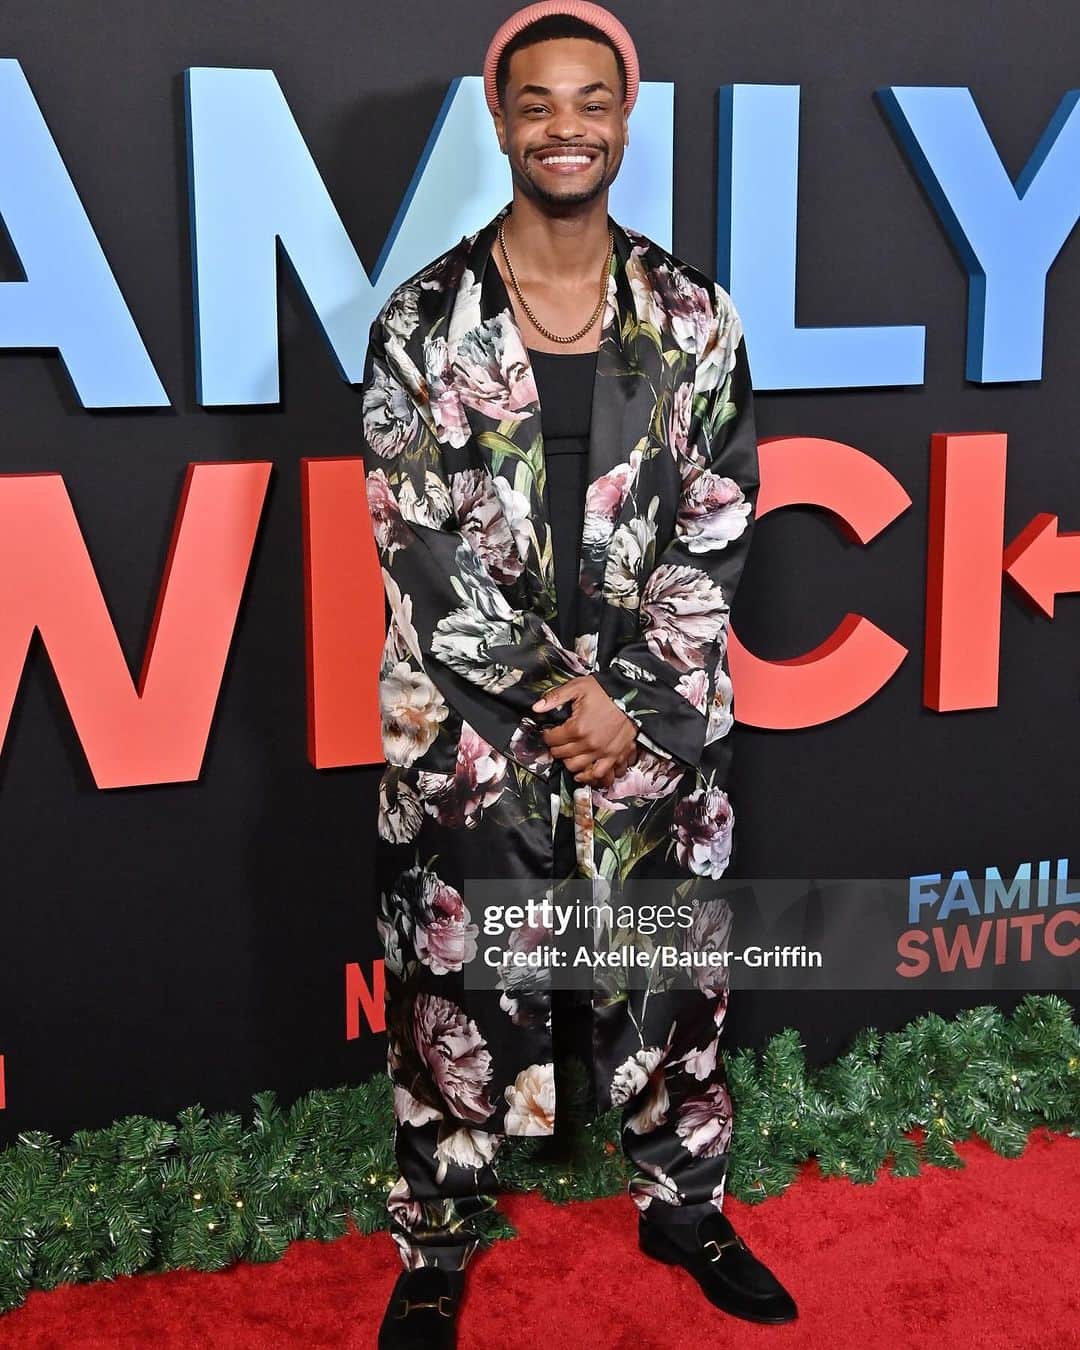 King Bachのインスタグラム：「I do a lil cameo in my friend @itsmaryveee and @mcgfilm film ‘Family Switch’ on Netflix now. Go check it outtttt ❤️❤️❤️」